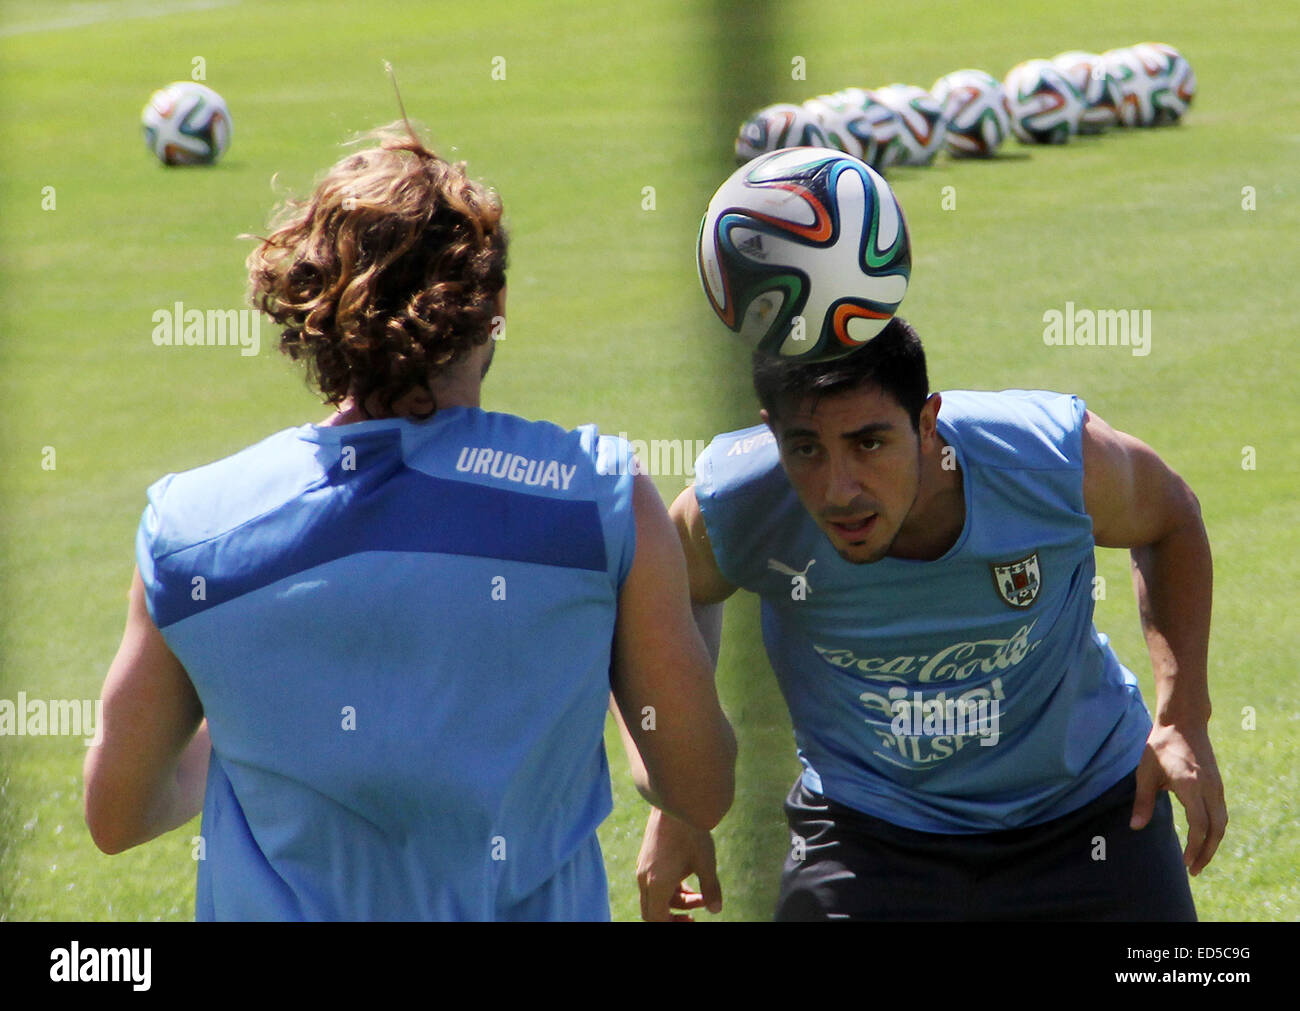 2014 FIFA World Cup - Uruguay national football team training held at Frasqueirao Stadium, following their win against Italy yesterday (24Jun14).  Featuring: Diego Forlan,Jorge Fucile Where: Natal, Brazil When: 25 Jun 2014 Stock Photo